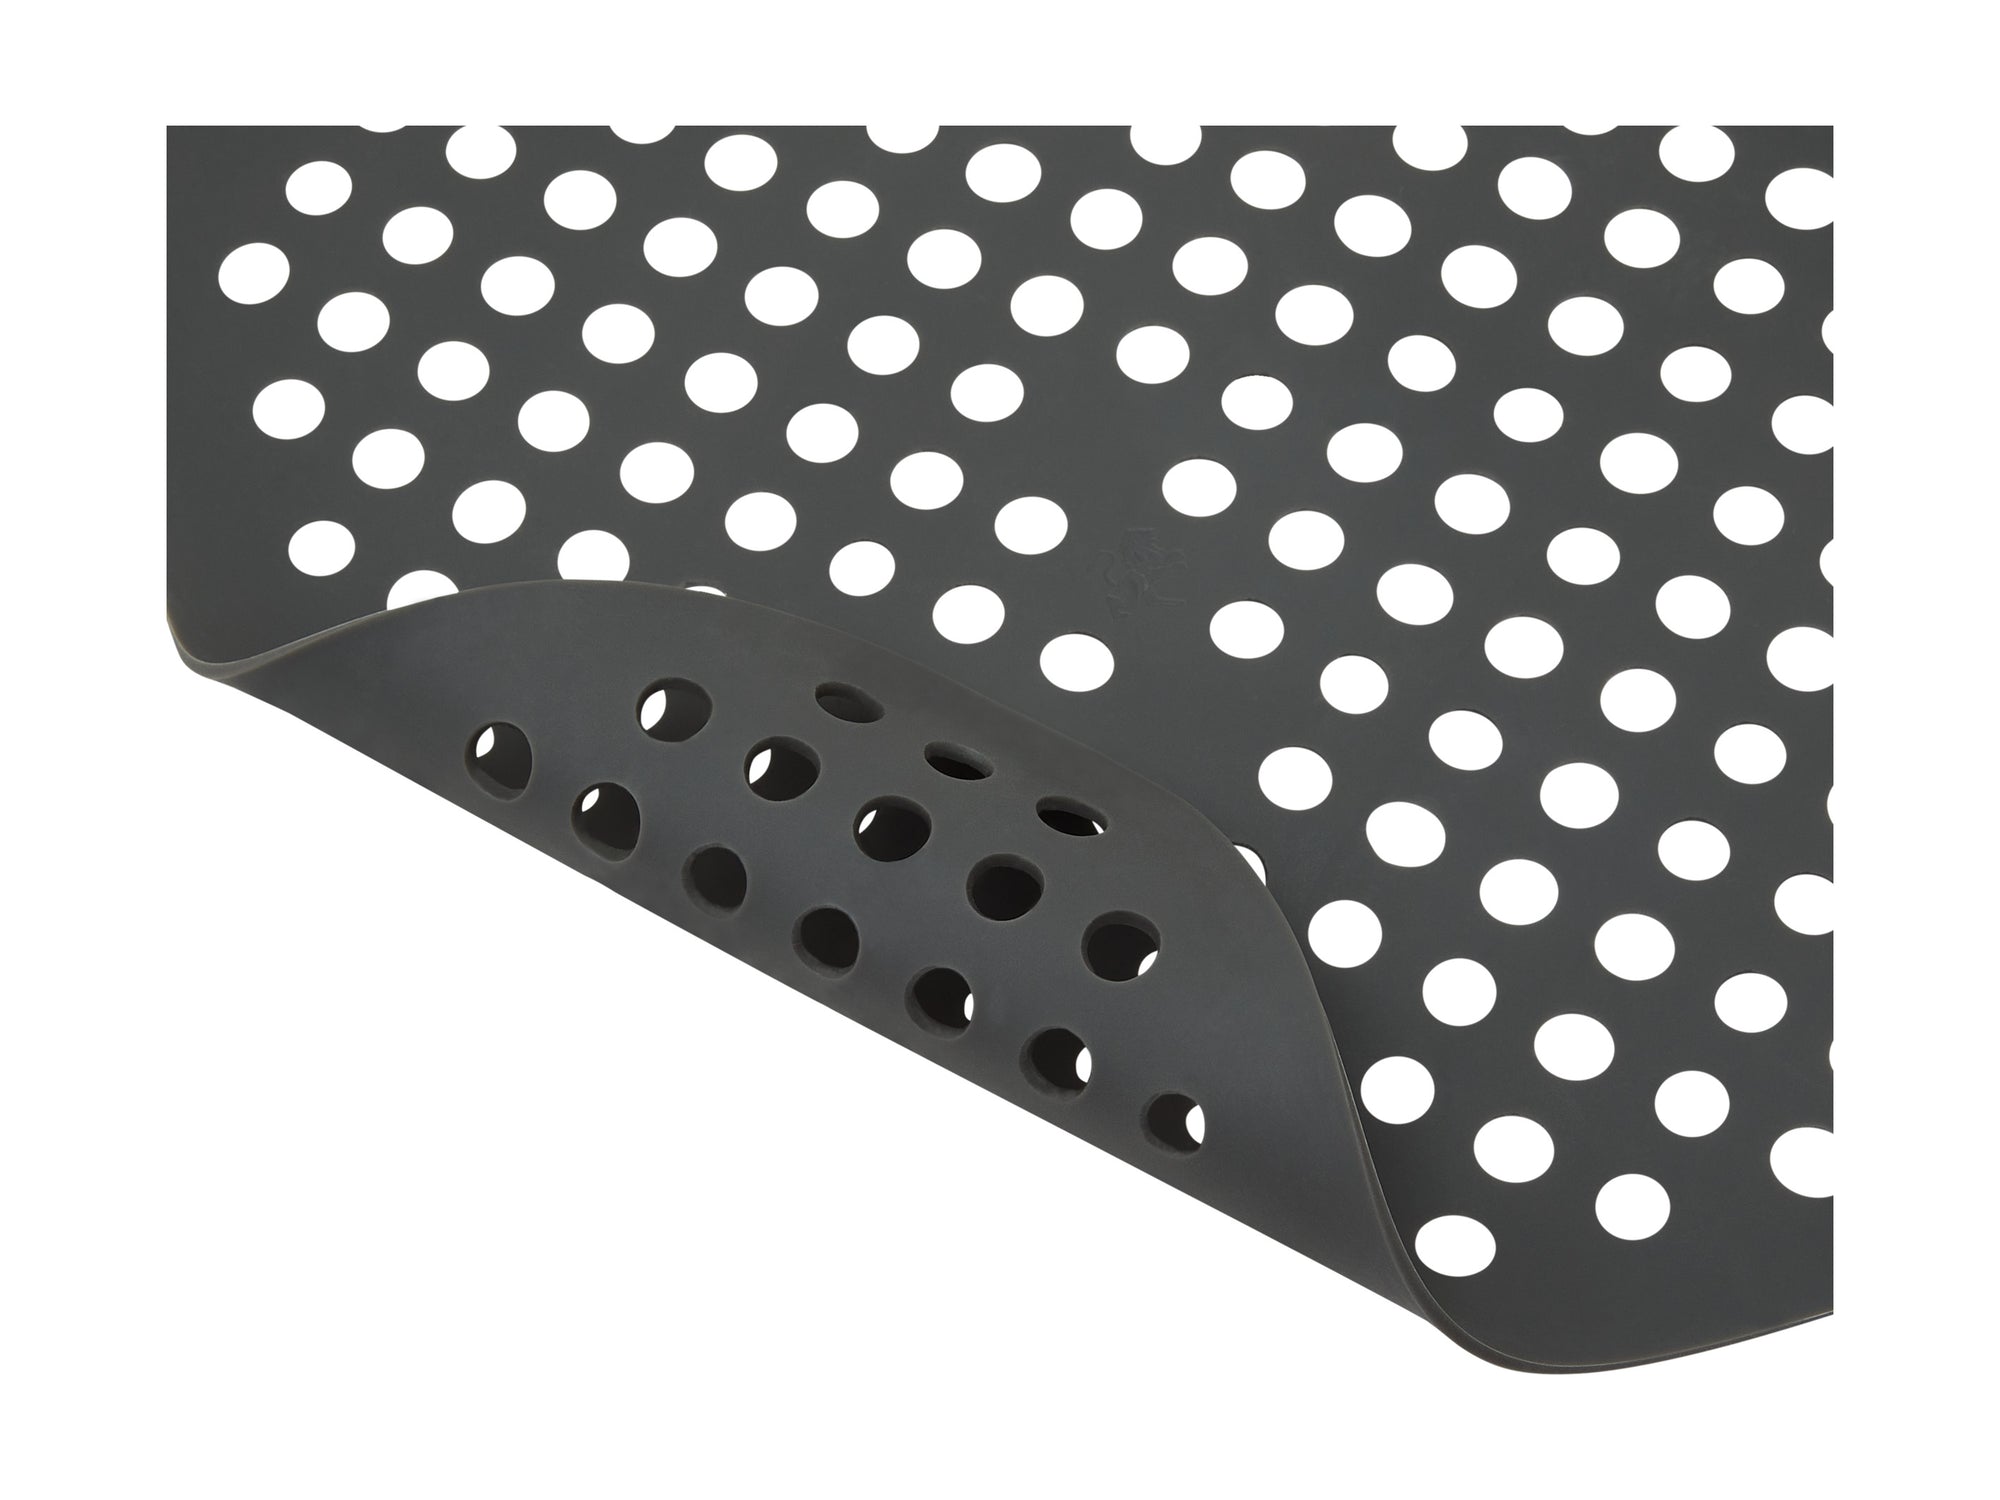 BakerMaker AirFry Square Silicone Baking Mat